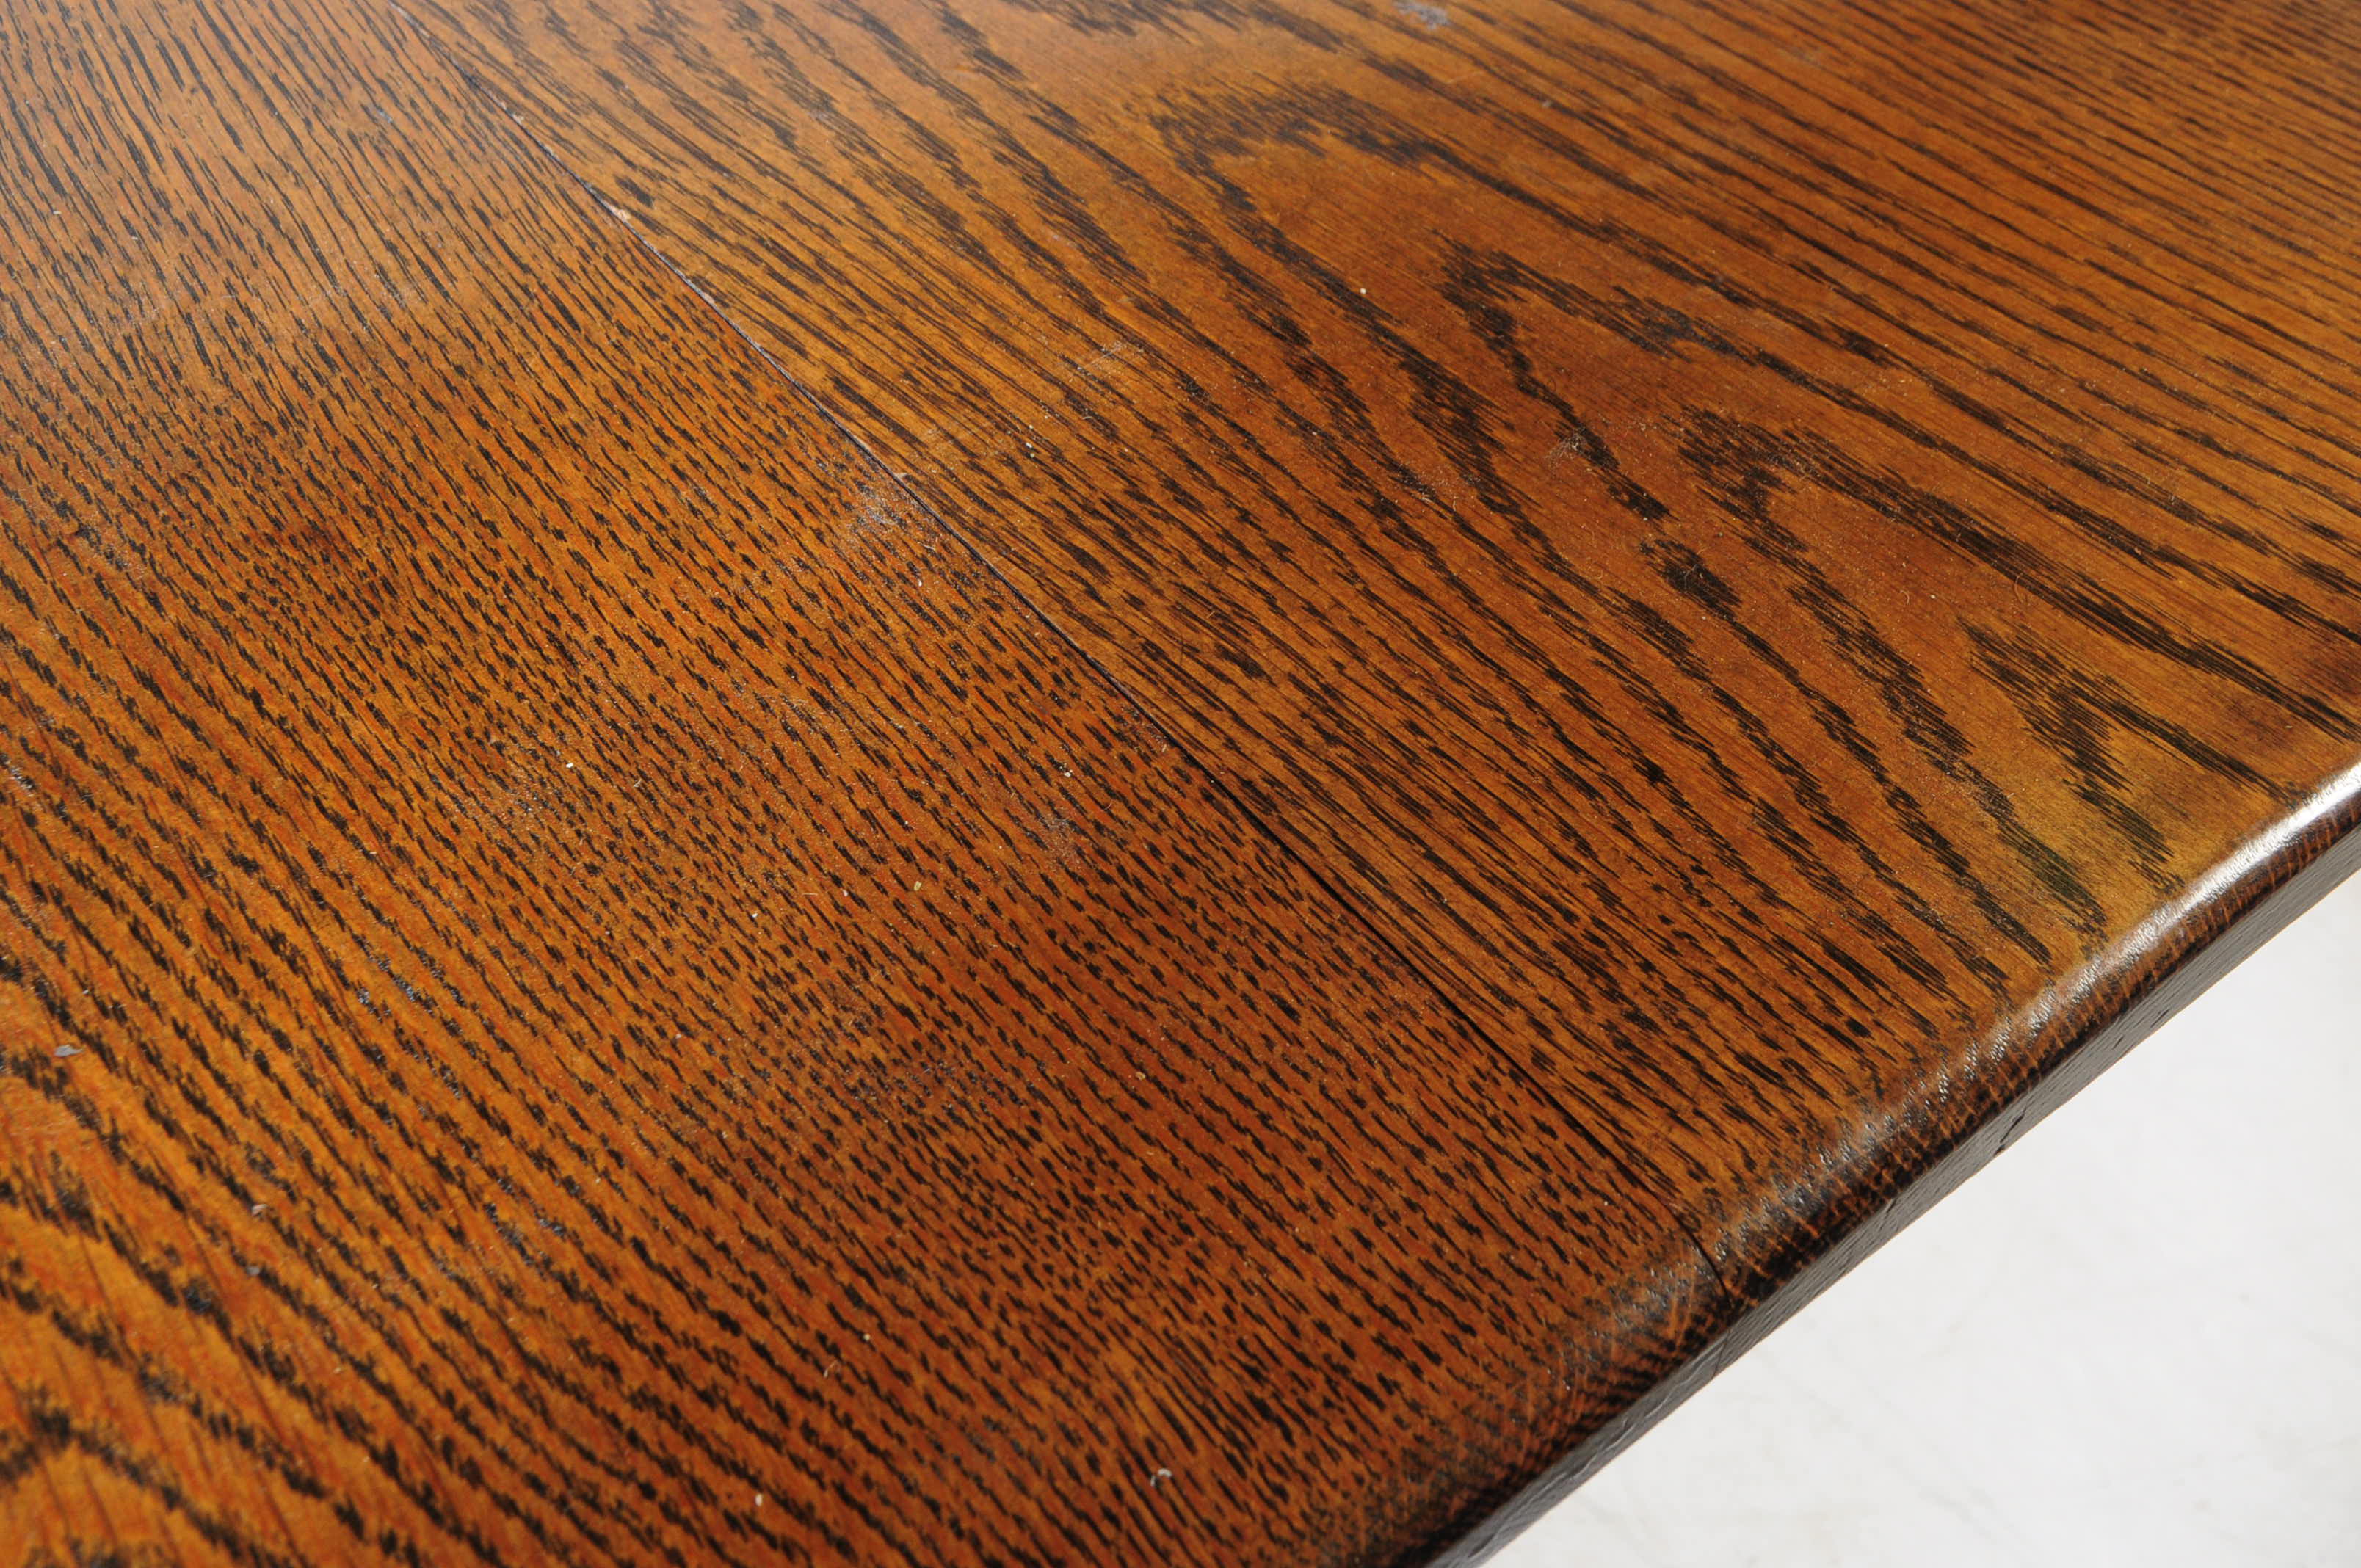 JACOBEAN REVIVAL OAK DINING TABLE & CHAIRS - Image 4 of 7